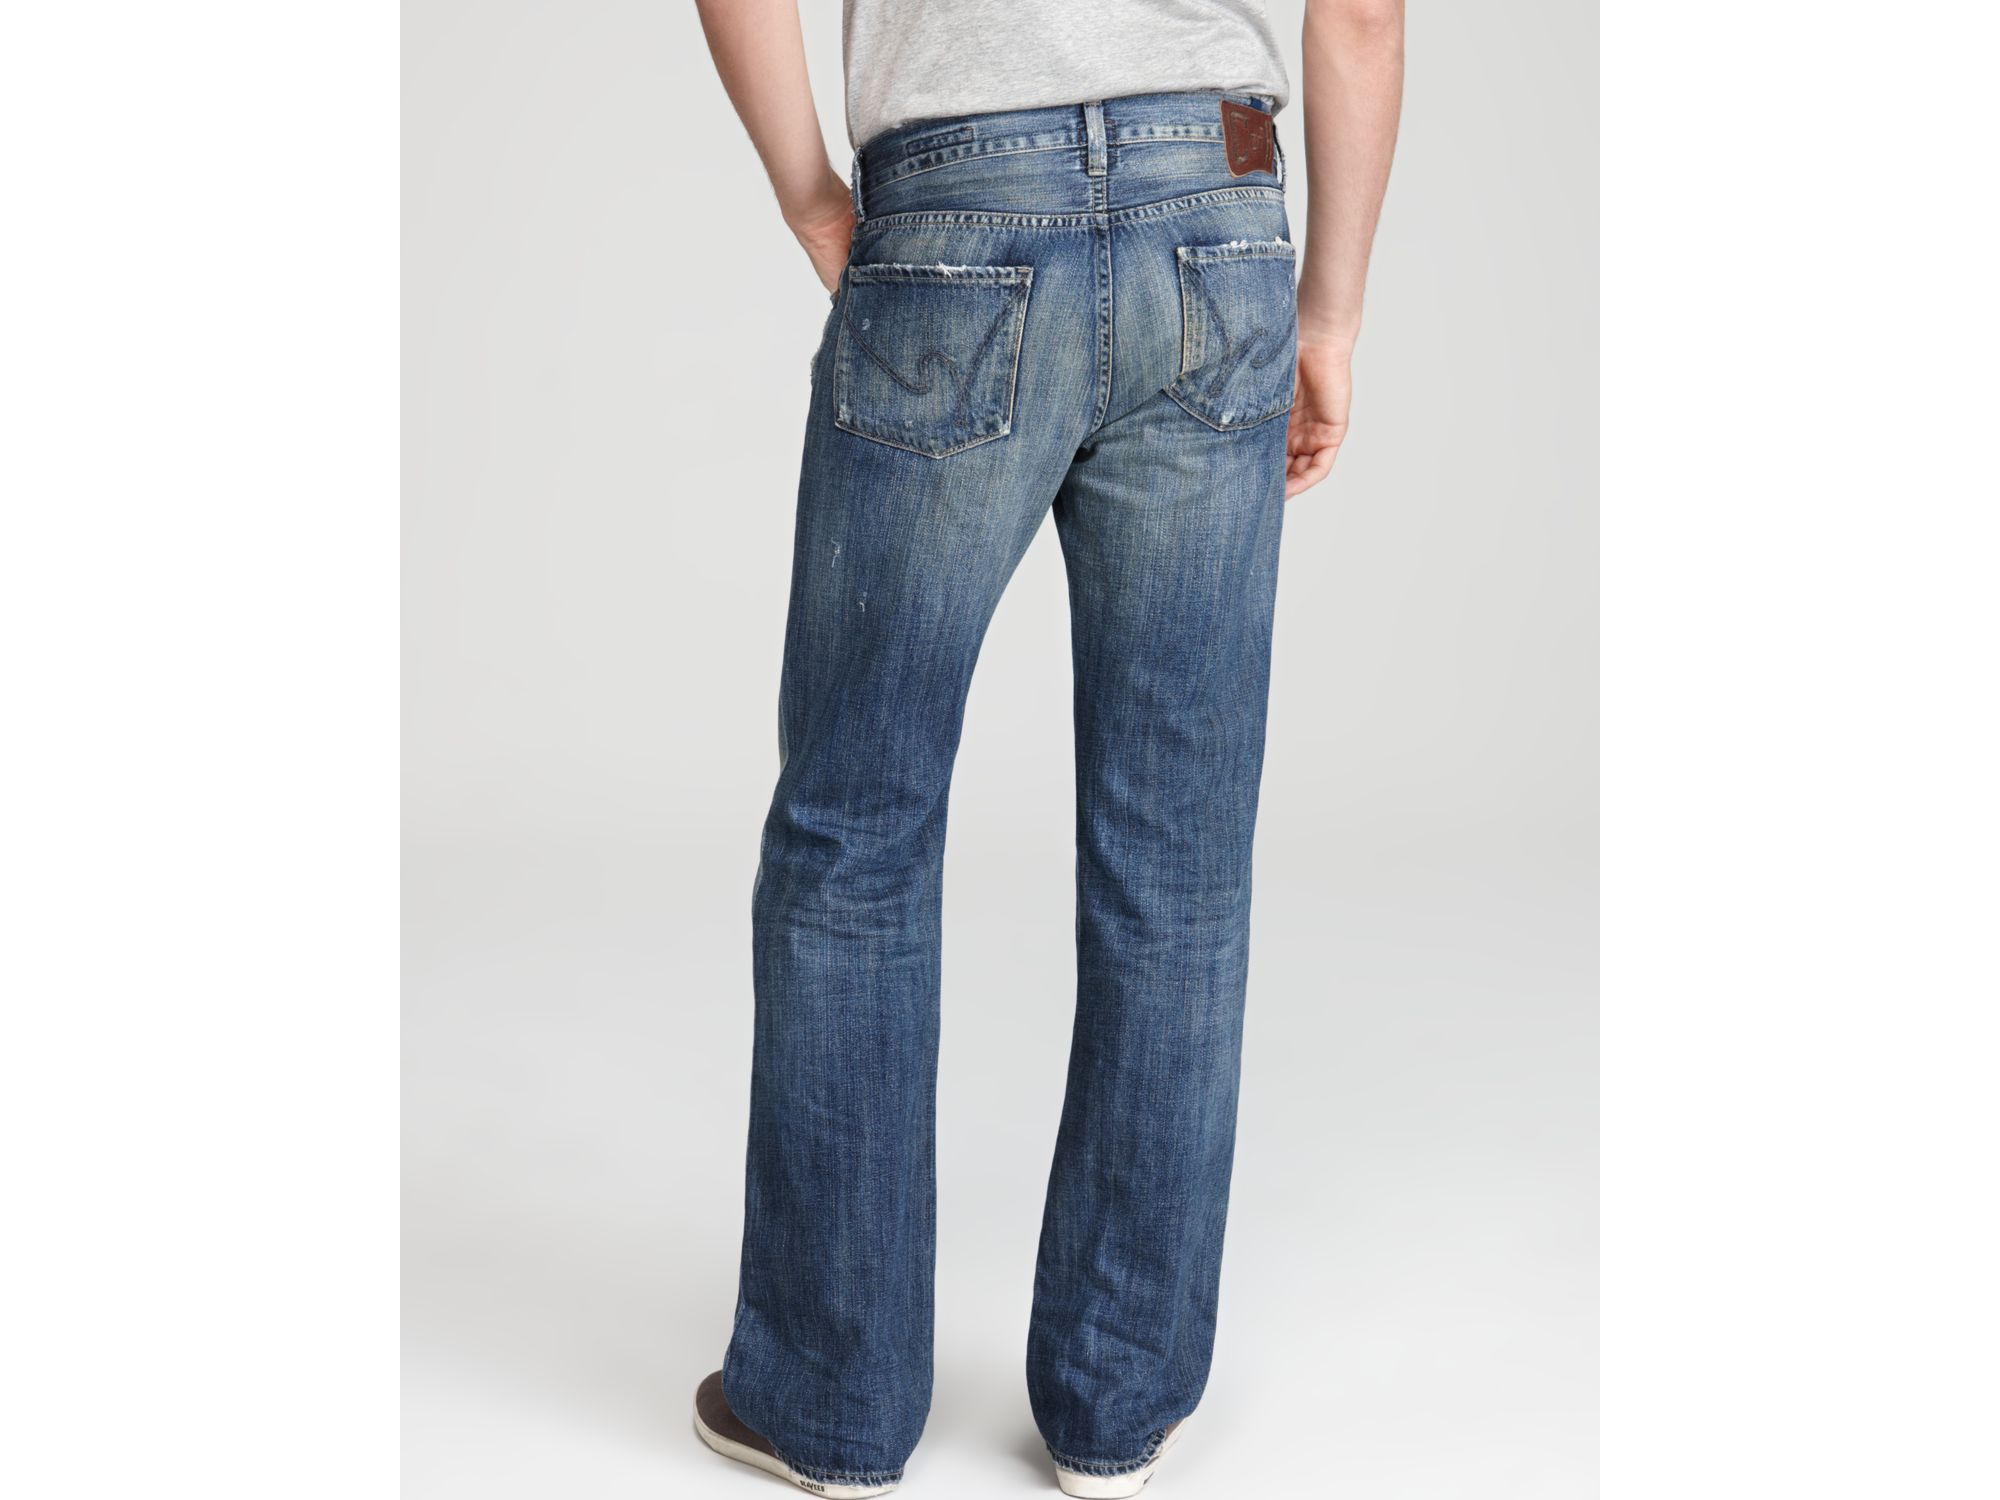 Citizens of humanity Jeans Jagger Bootcut in Corbin in Blue for Men | Lyst